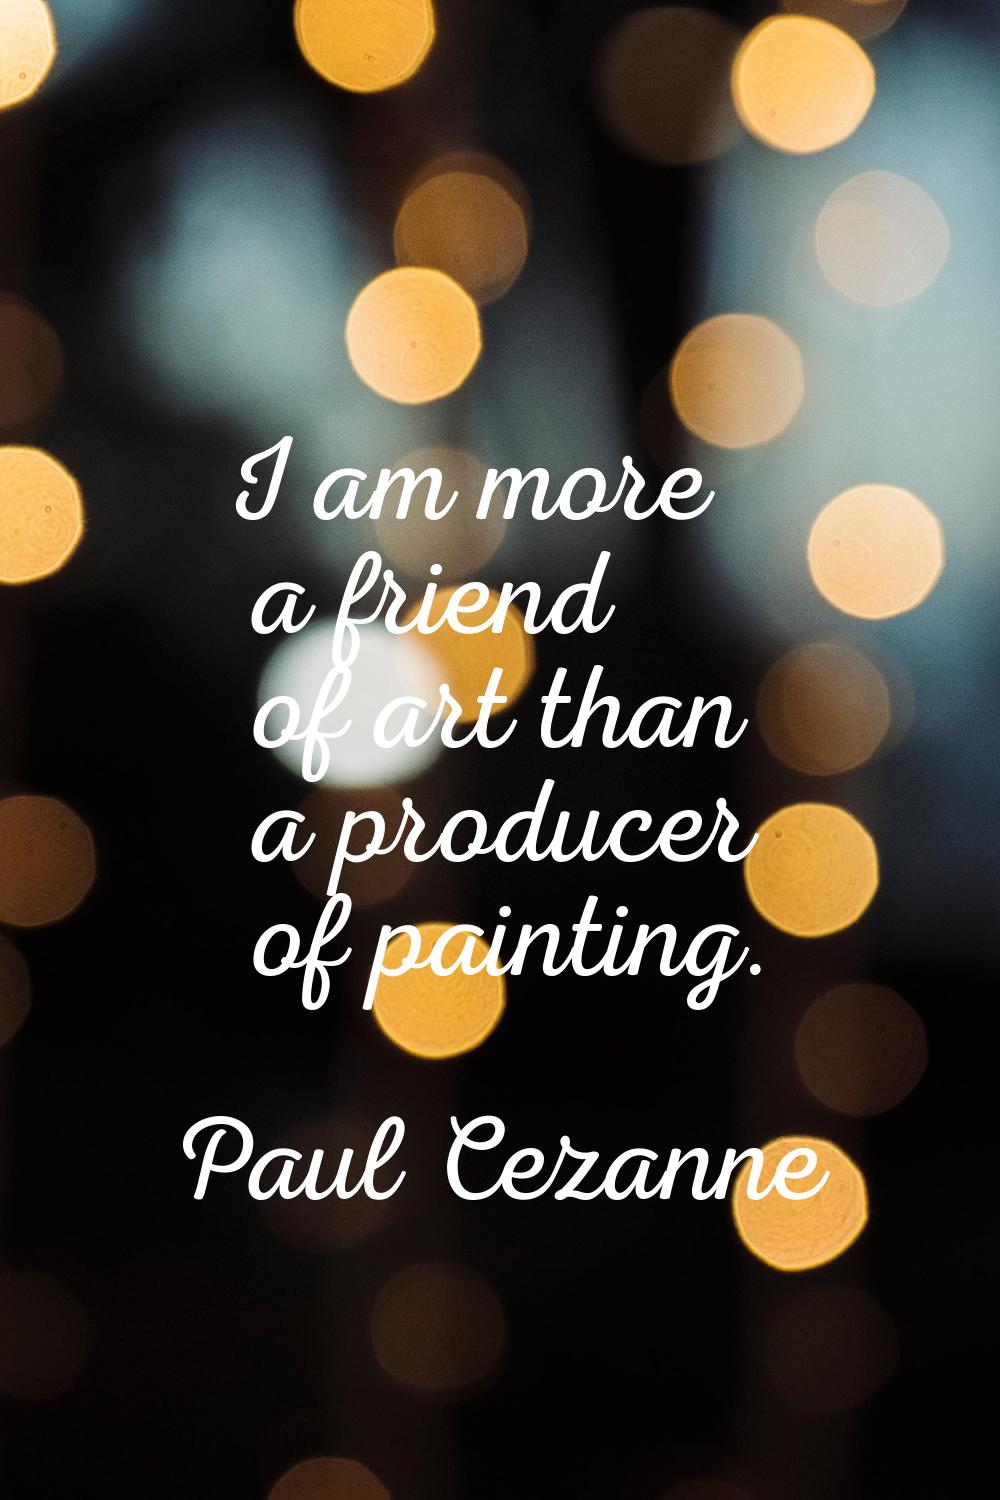 I am more a friend of art than a producer of painting.